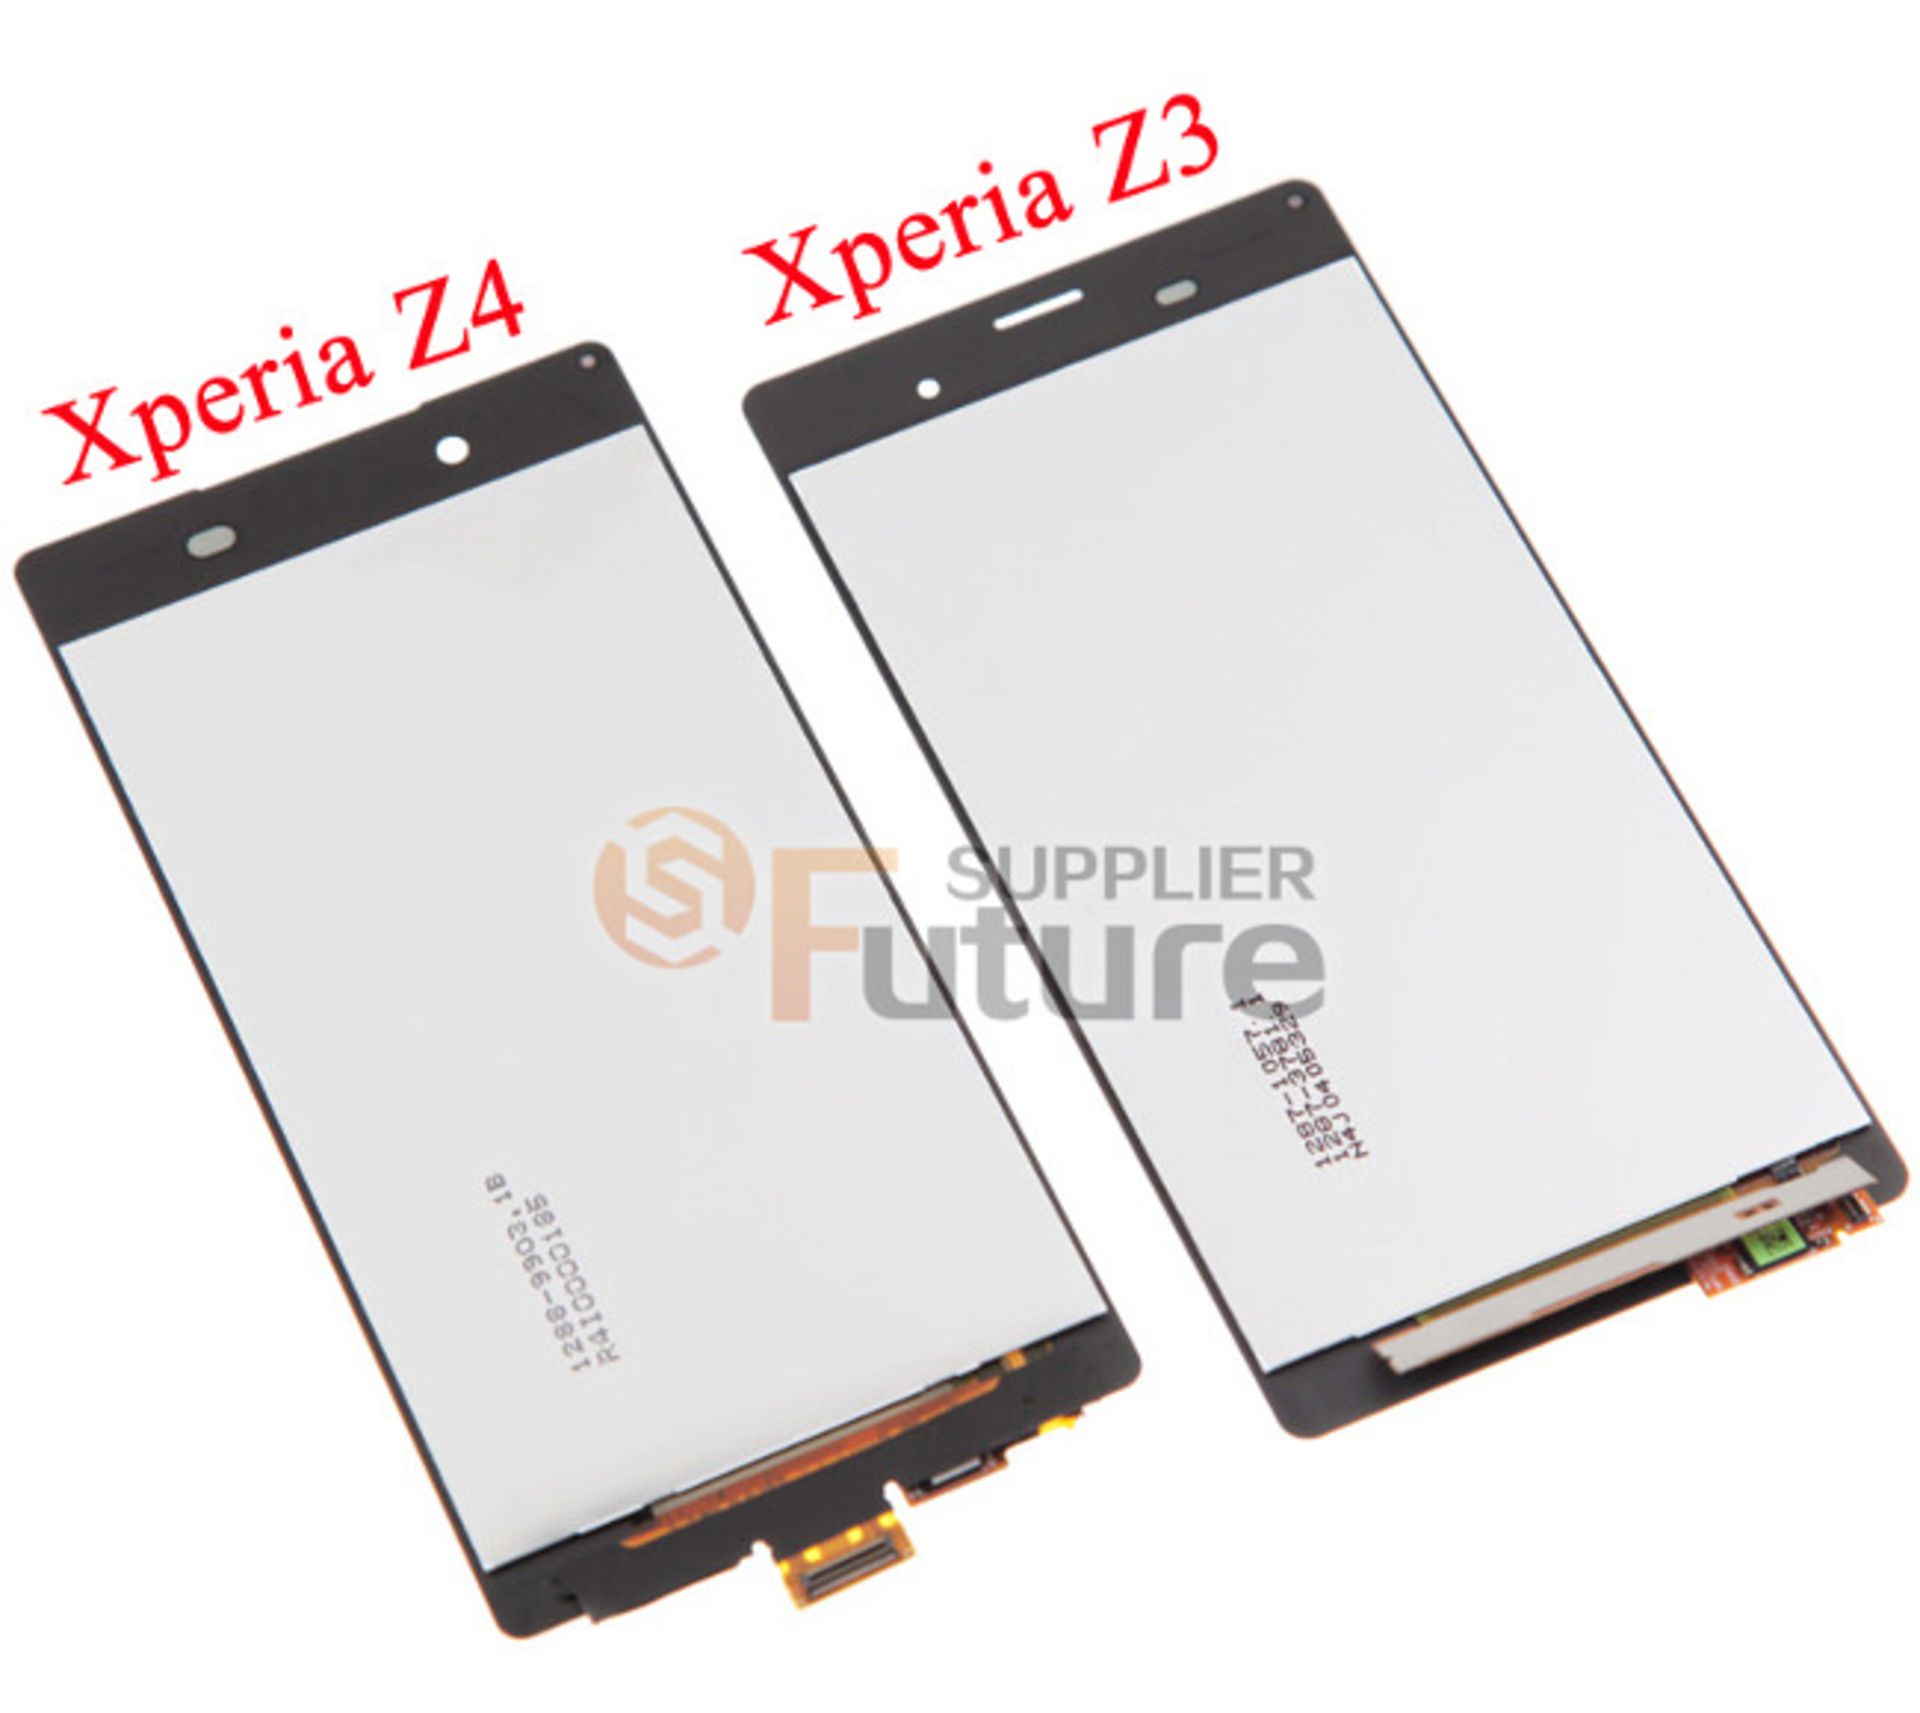 Leaked-Sony-Xperia-Z4-chassis-and-LCD-touch-digitizer 9